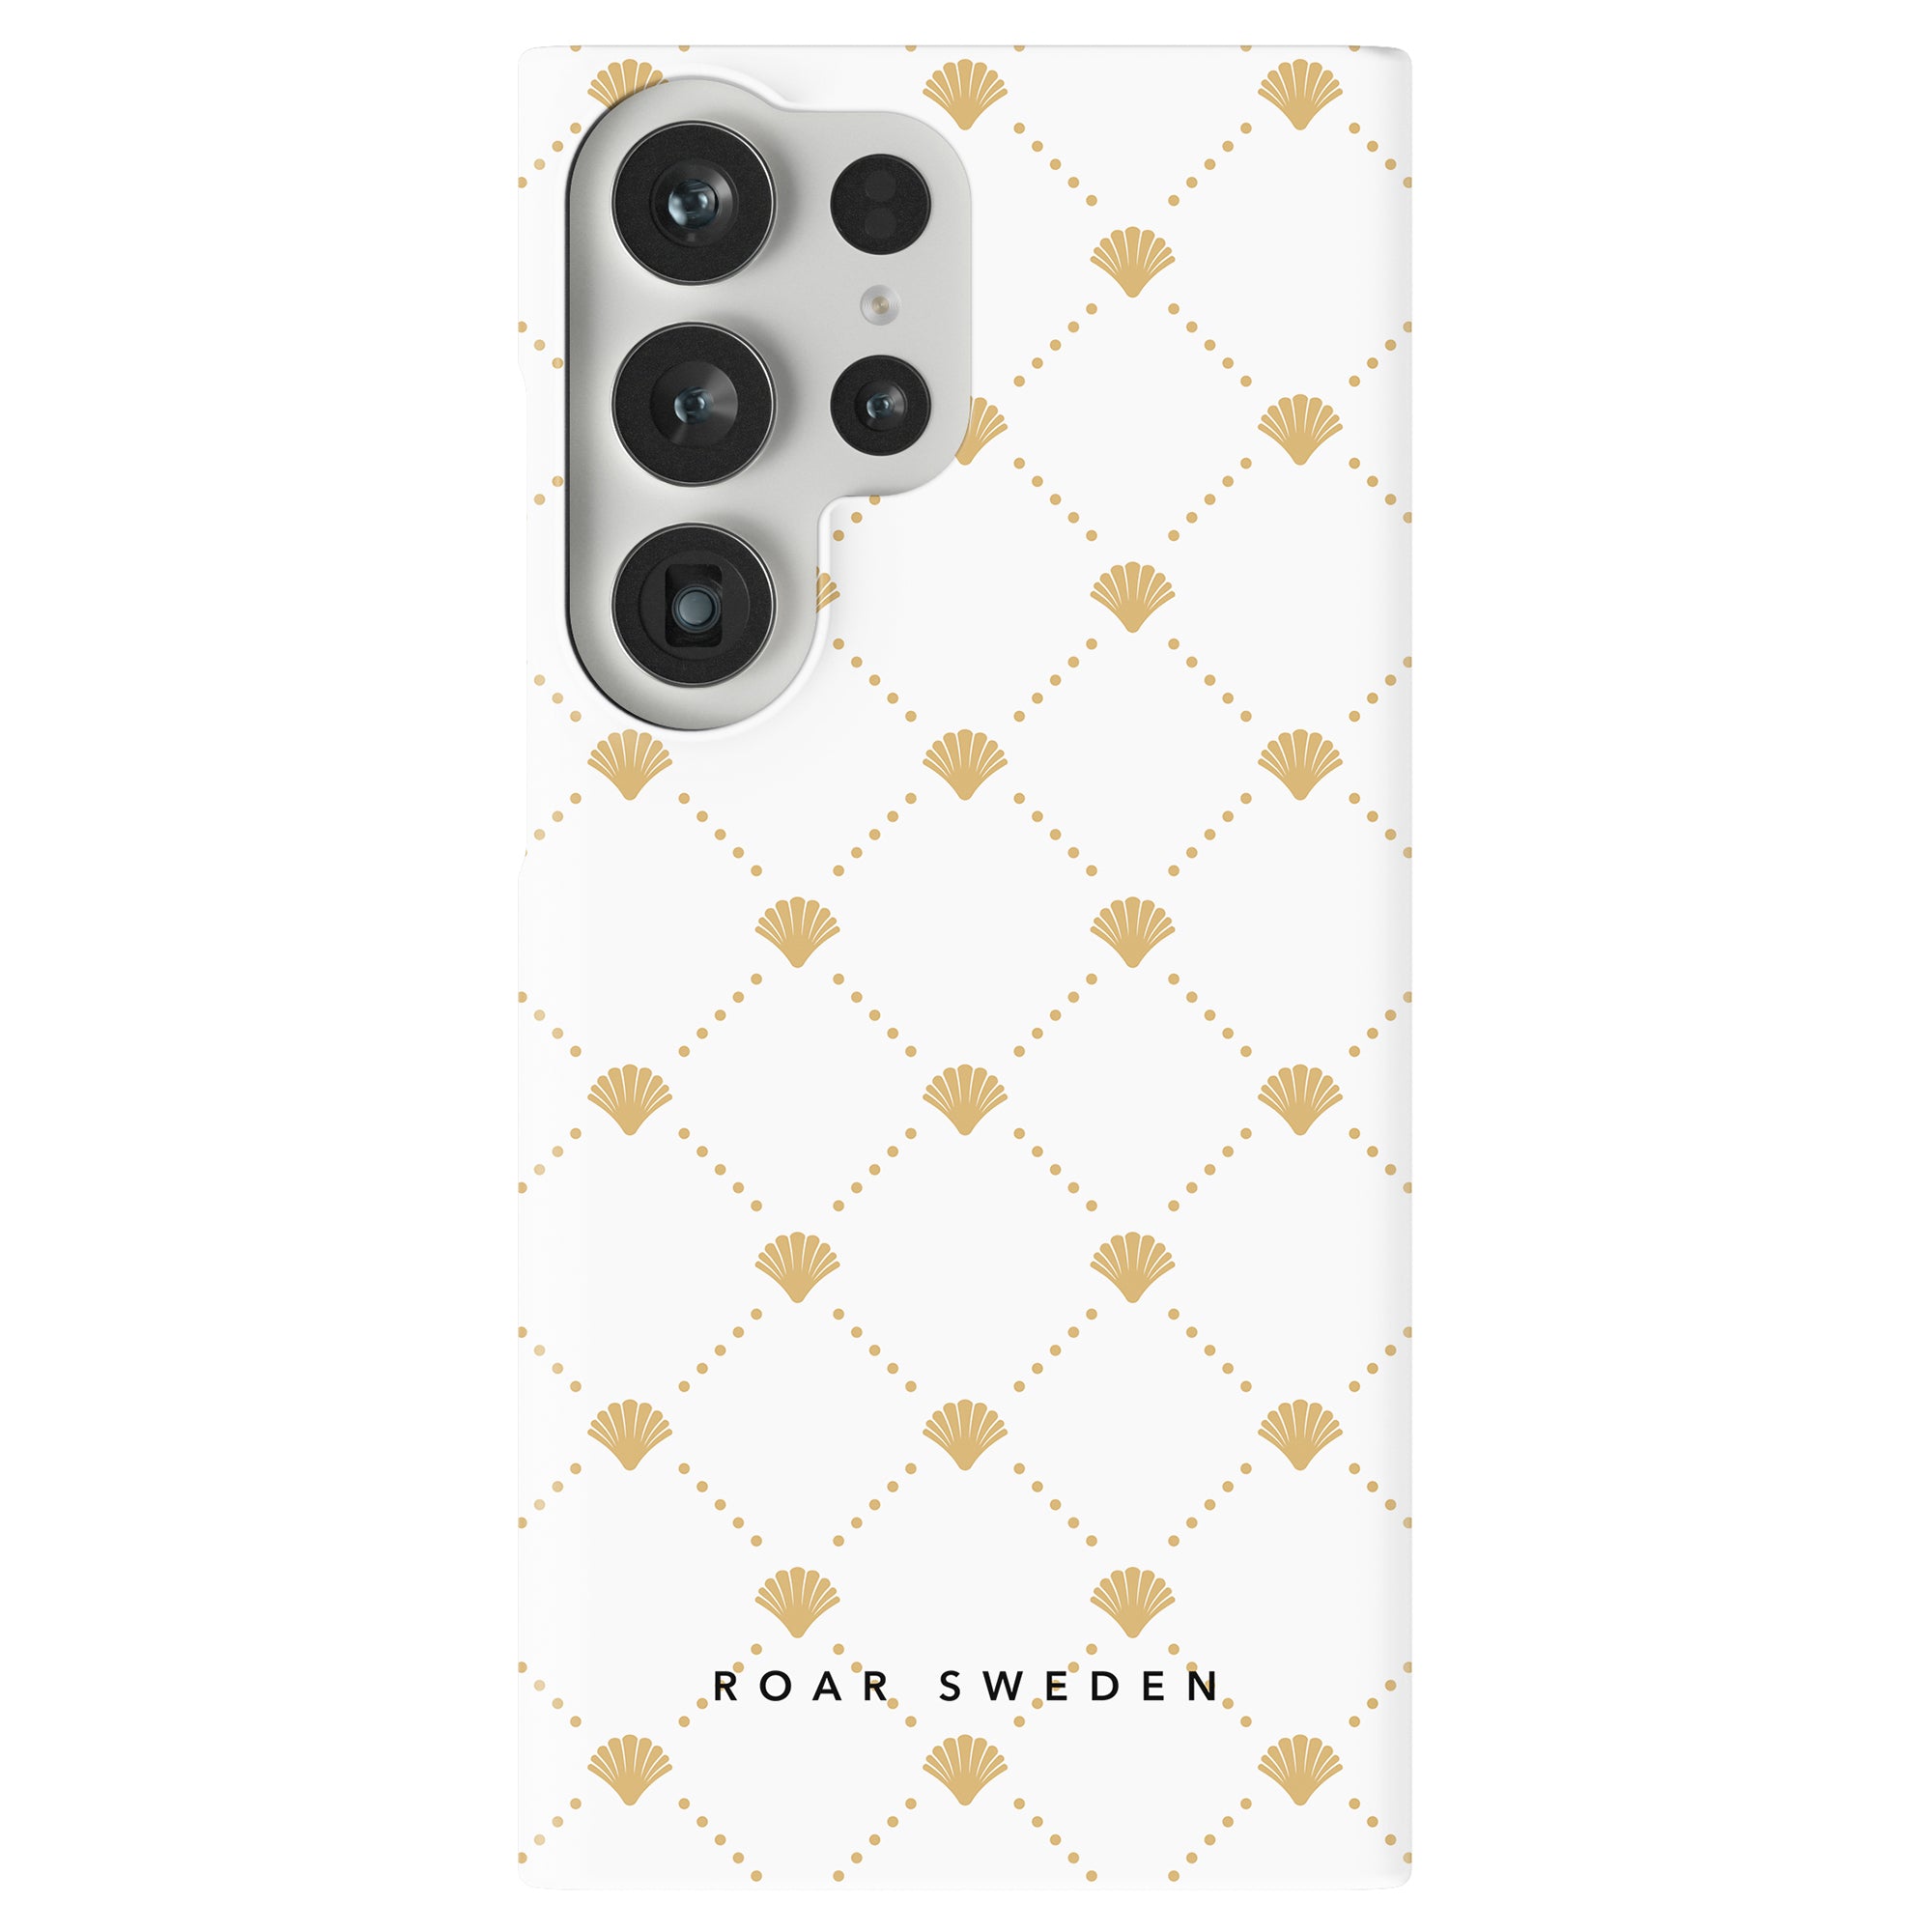 Luxe Shells White - Slim case with a gyllene snäckskal pattern and the words "ROAR SWEDEN" printed at the bottom. Part of the Ocean Collection, it features precise cutouts for the camera and ports, ensuring functionality while adding a touch of elegance.